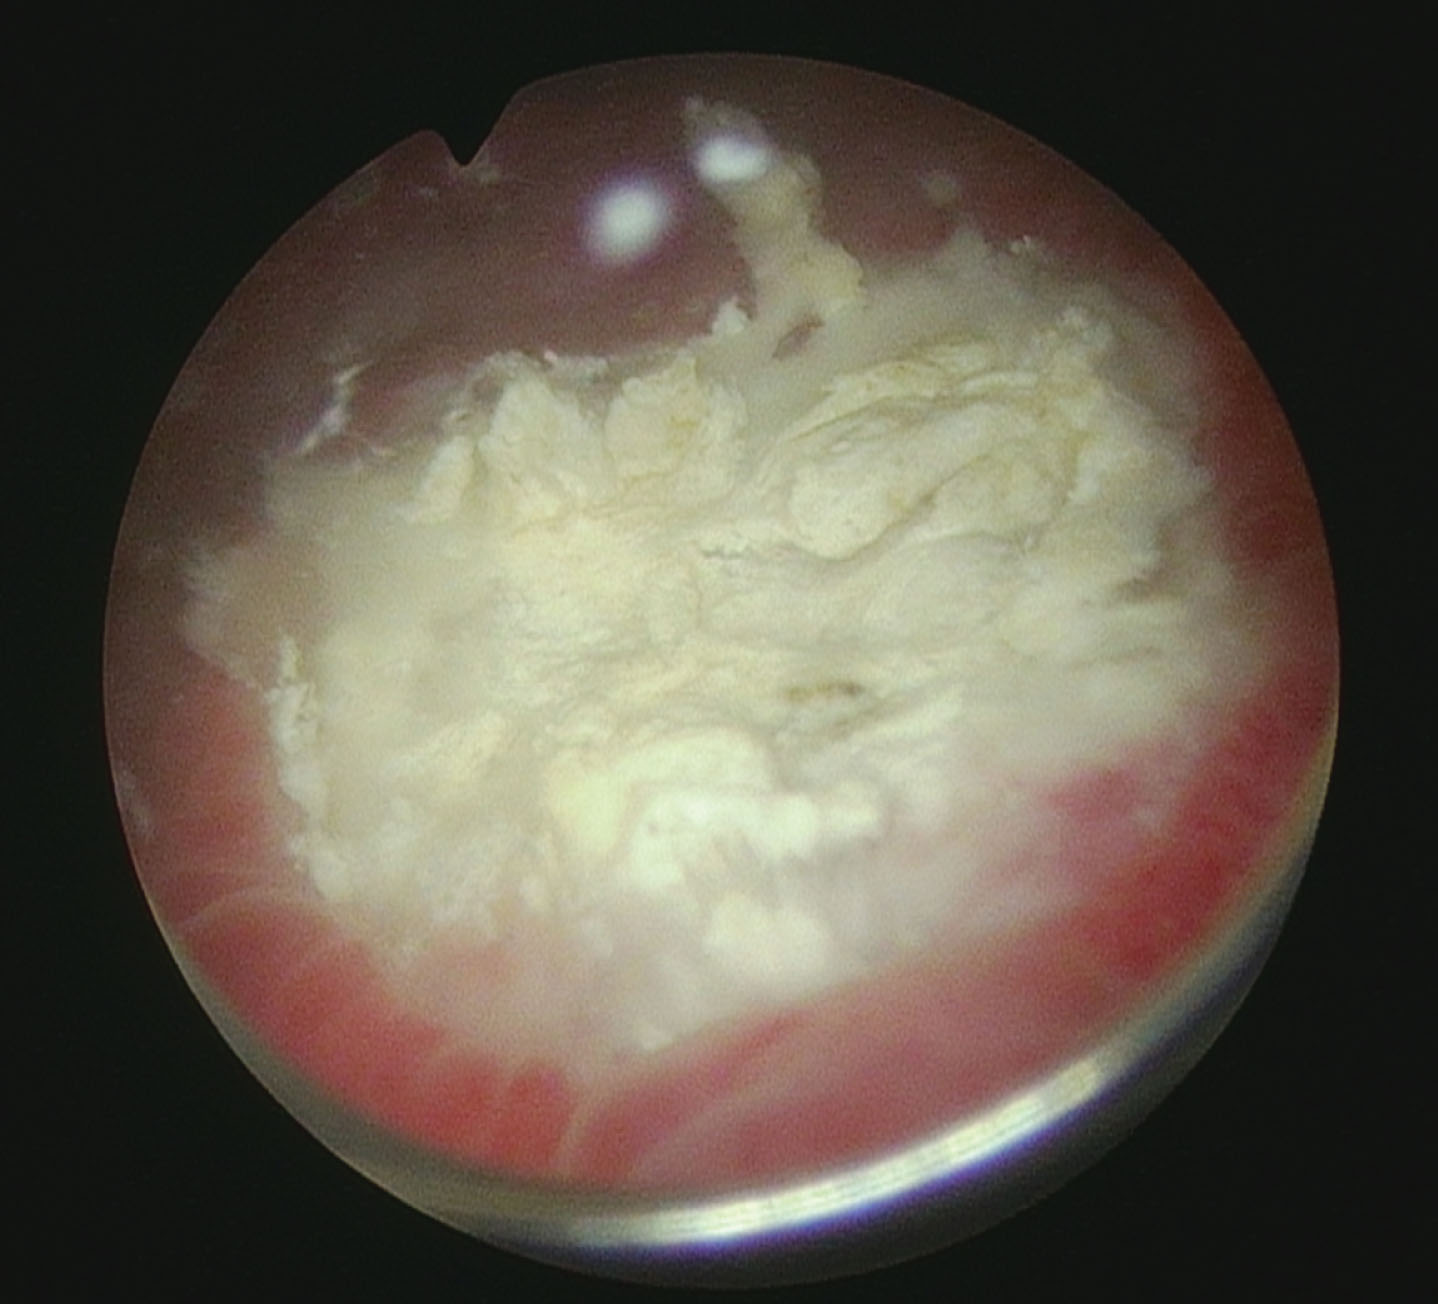 Appearance of bladder before third TUR of the bladder. Necrotic surface.